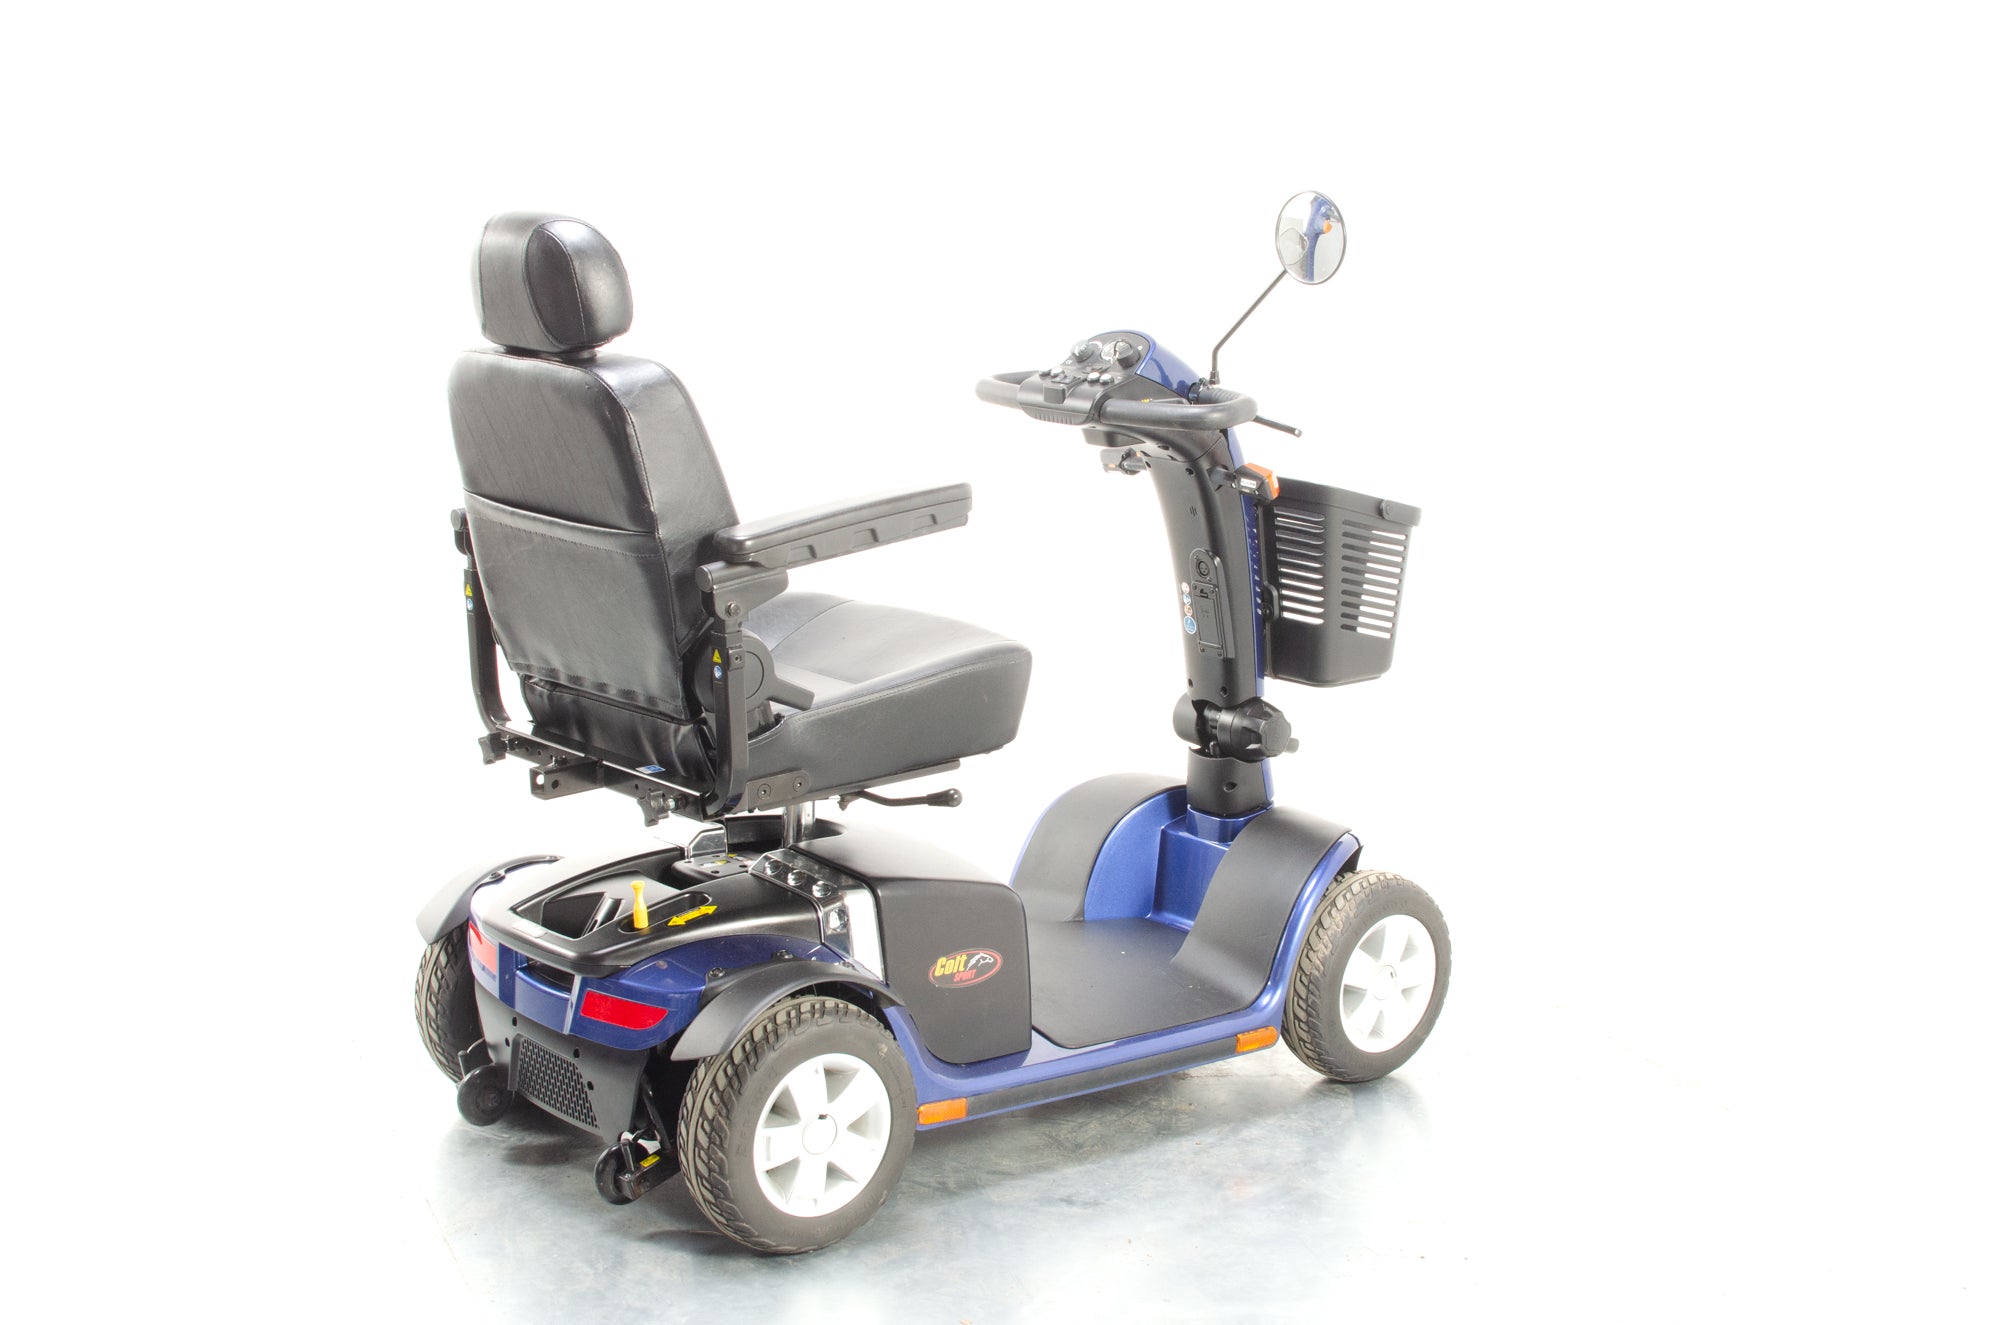 Pride Colt Sport Electric Mobility Scooter 8mph Used Transportable Road Pavement